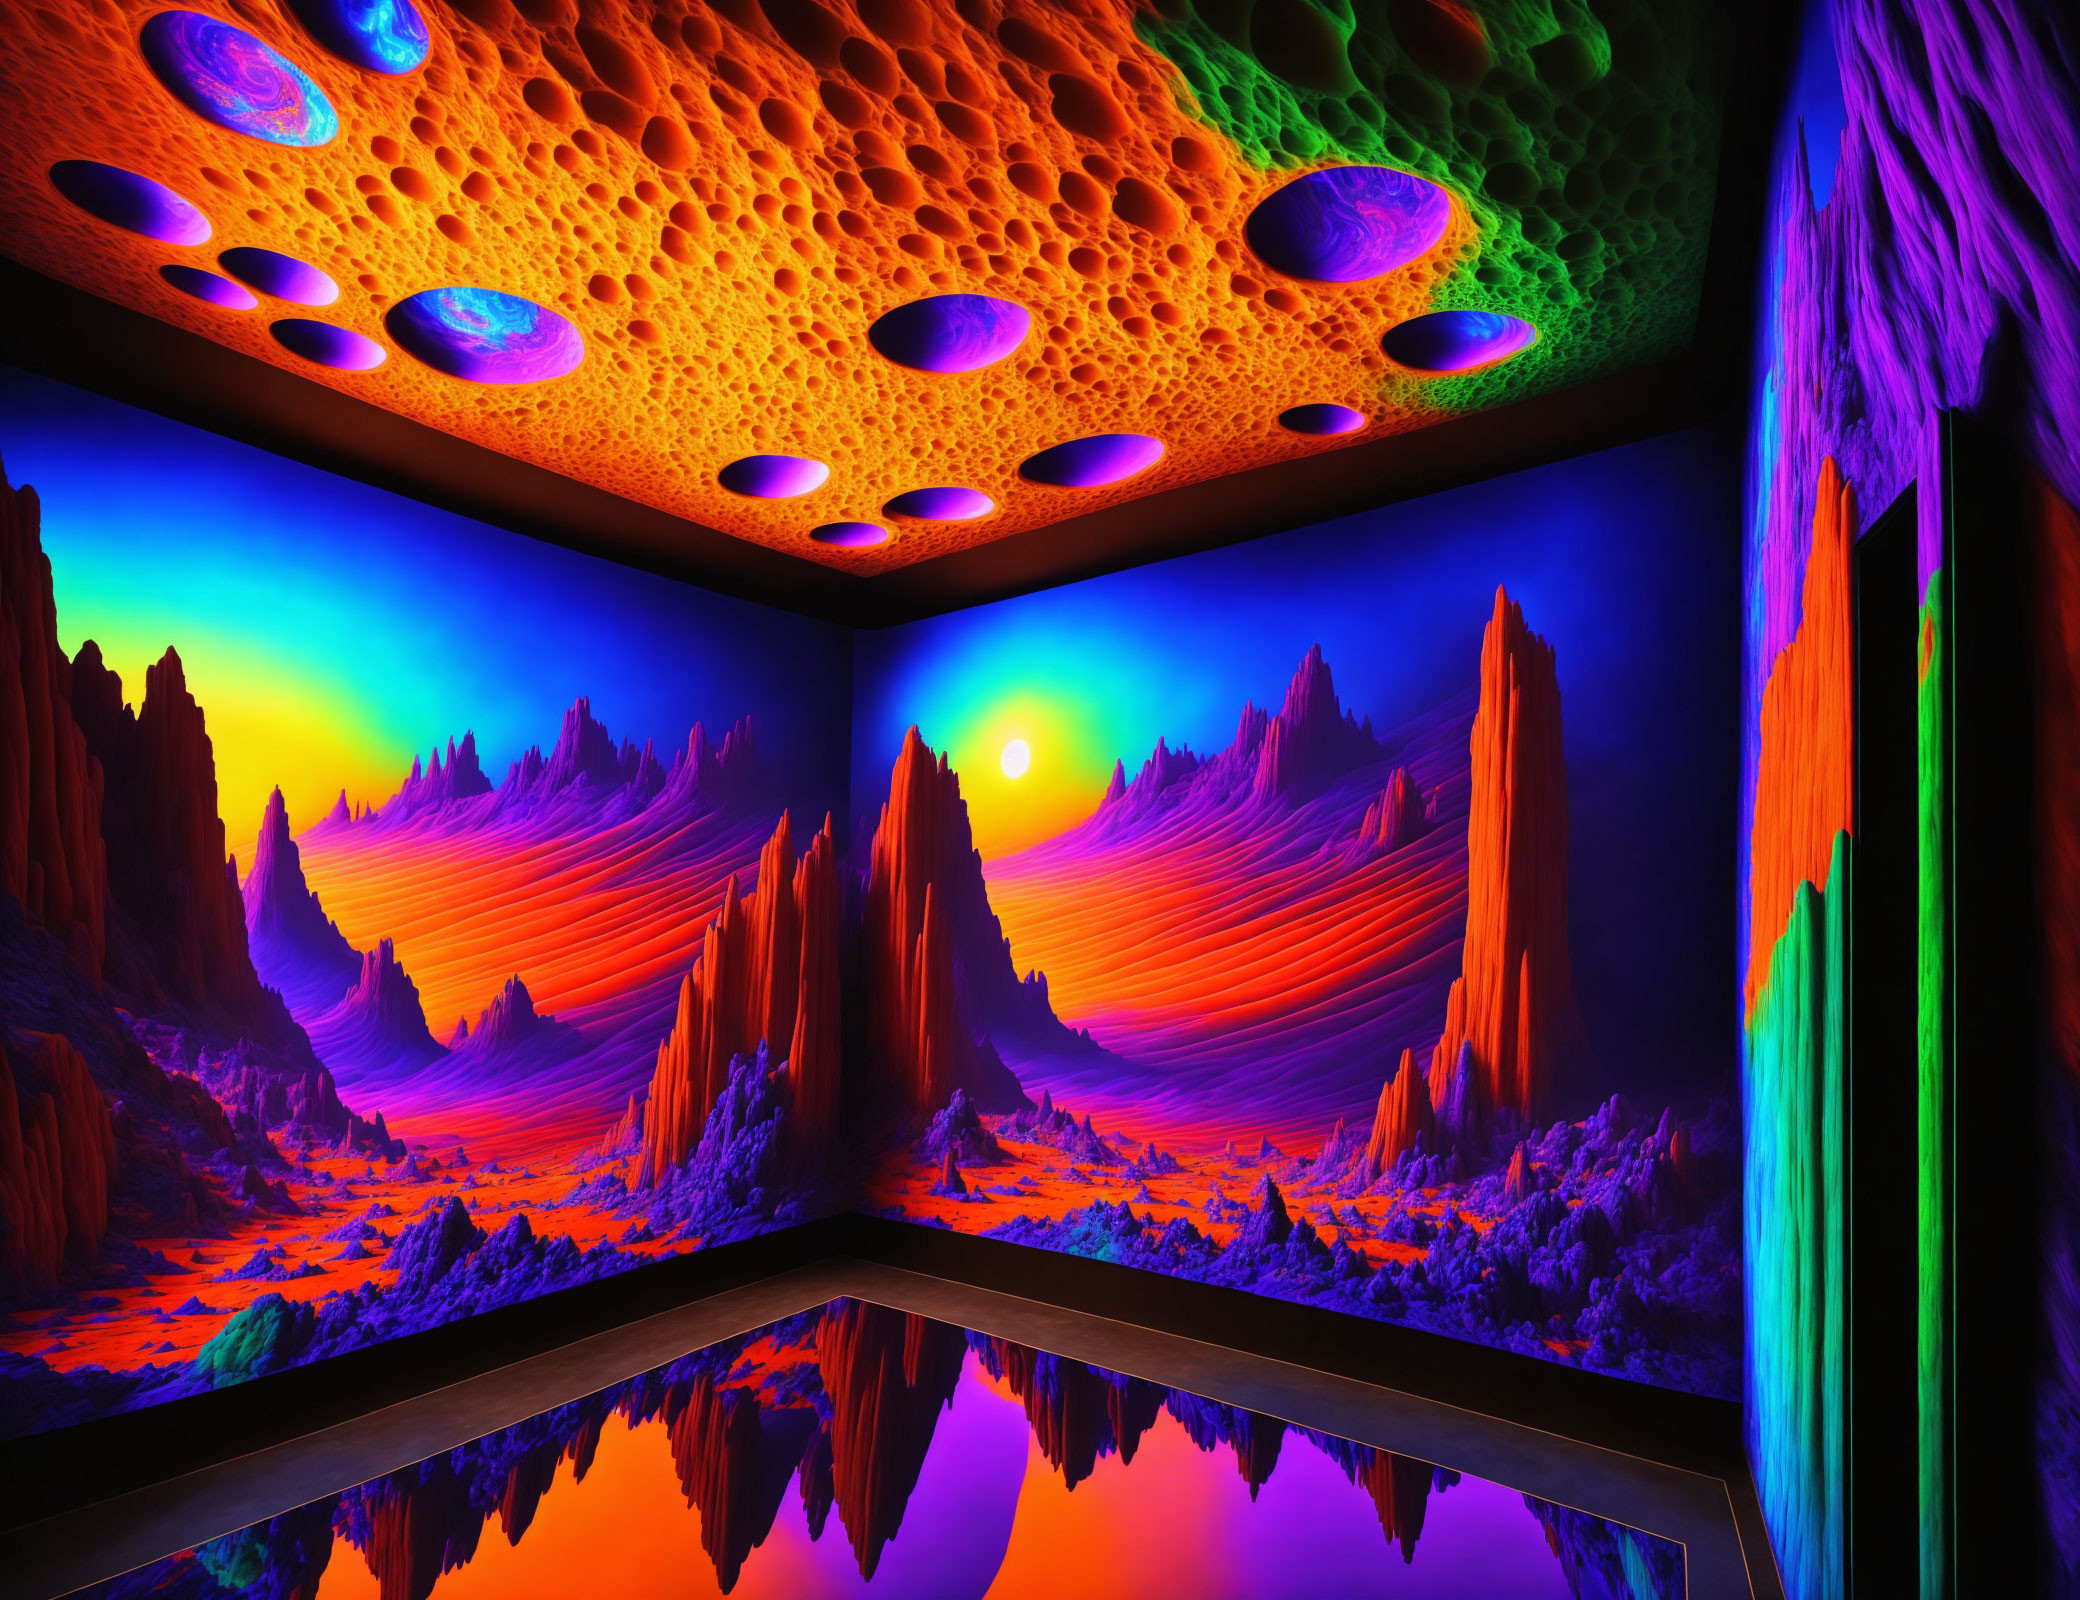 UV-lit psychedelic room with fluorescent landscape and mirrored floor